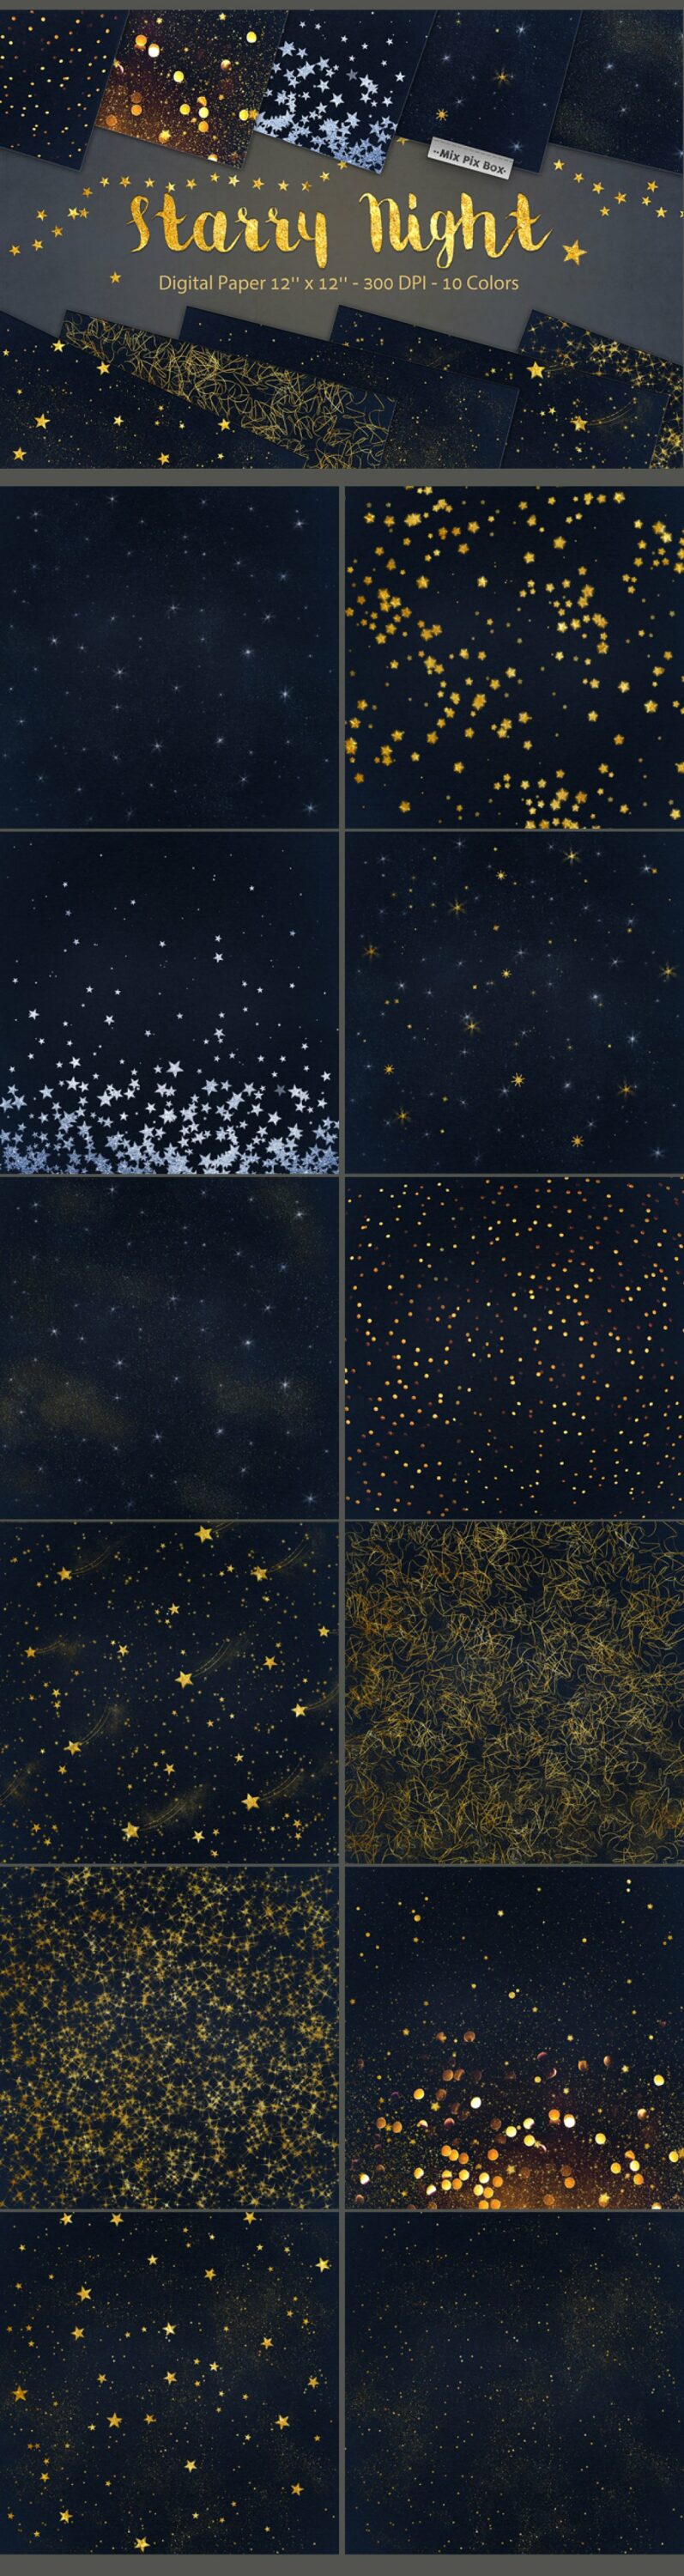 Big starry night collection.